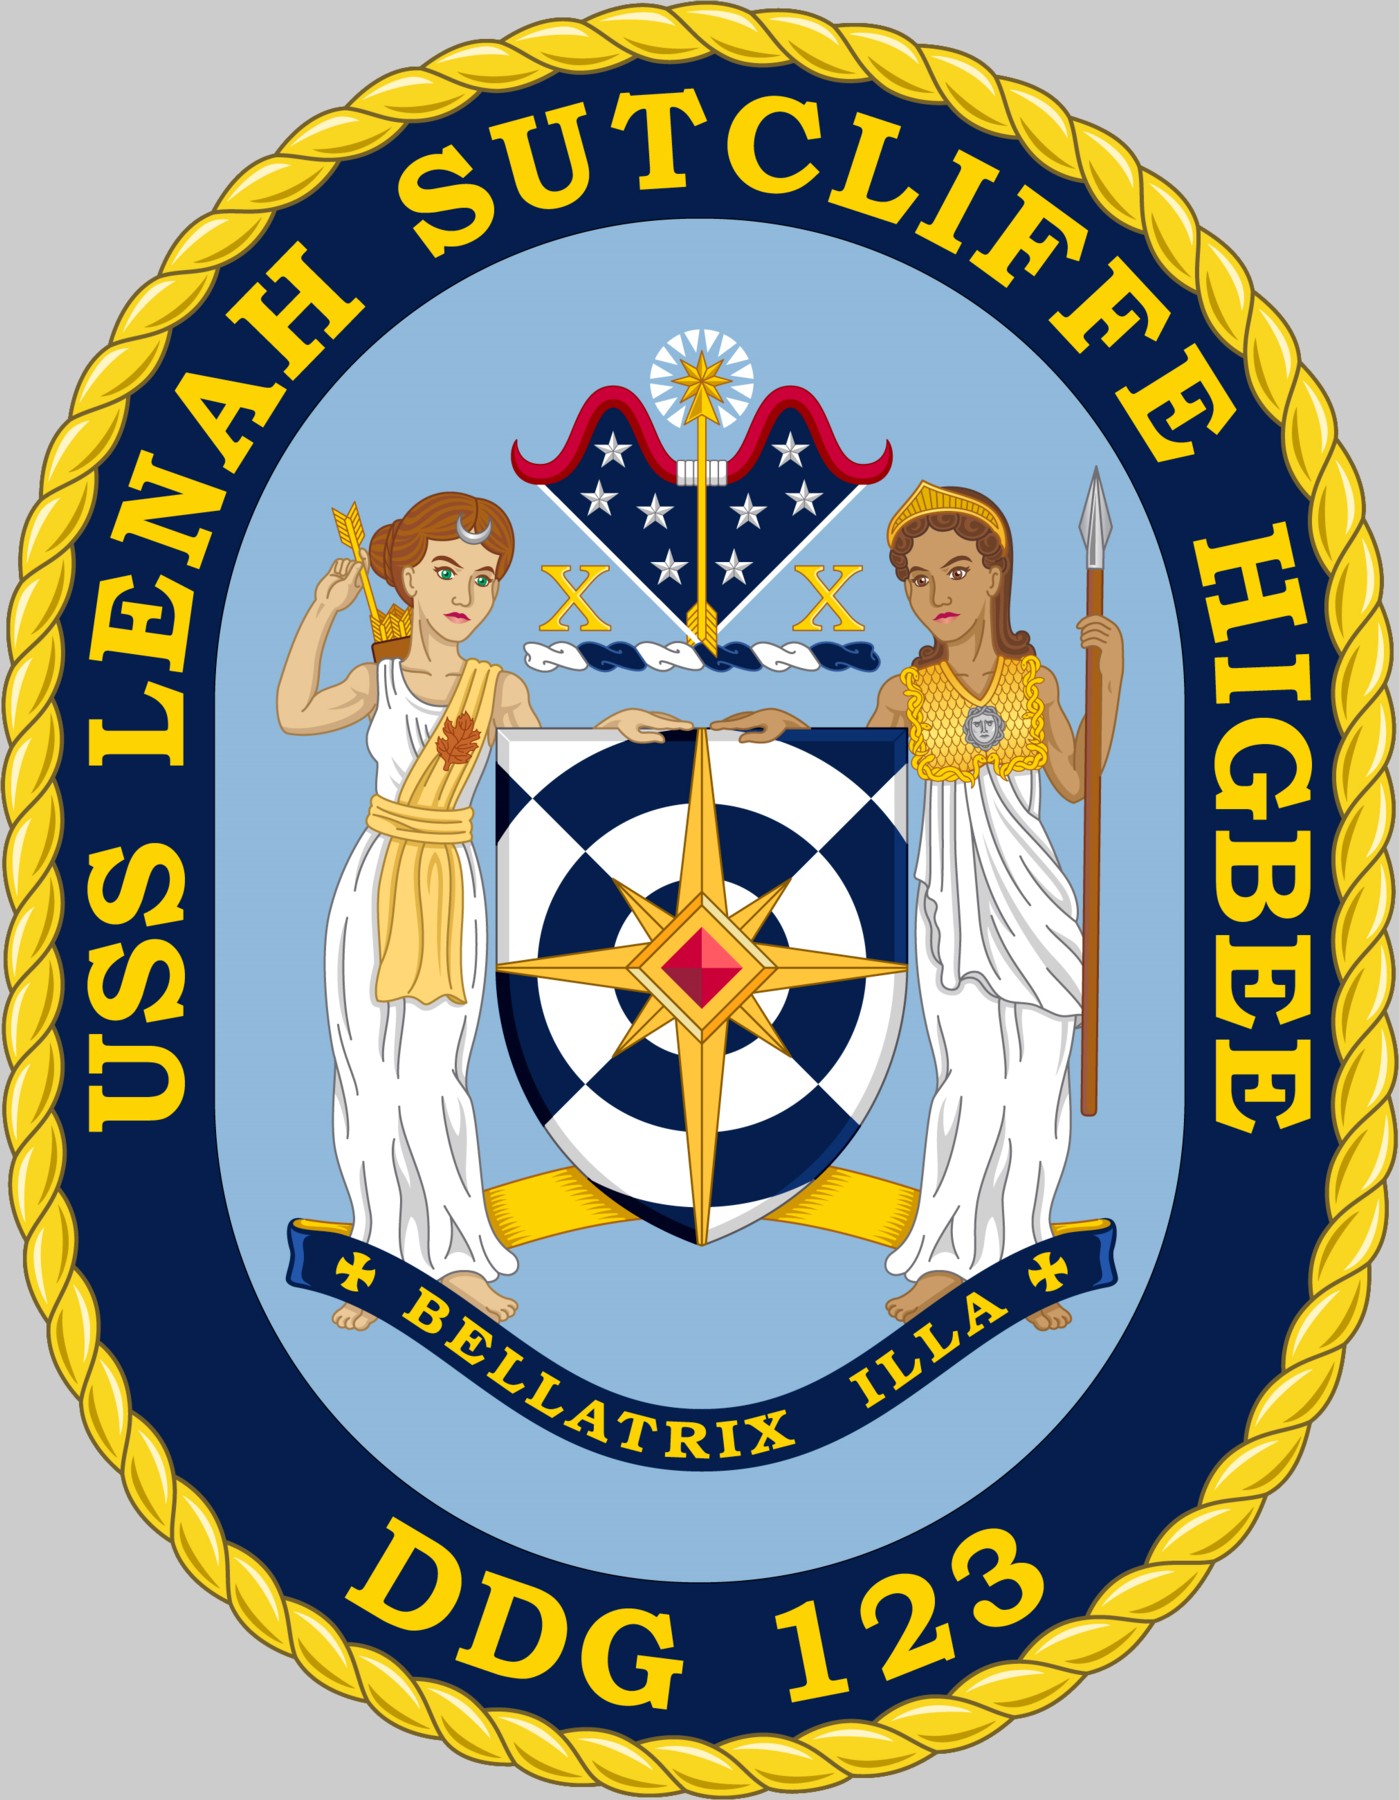 ddg-123 uss lenah h. sutcliffe higbee insignia crest patch badge arleigh burke class guided missile destroyer us navy 02x